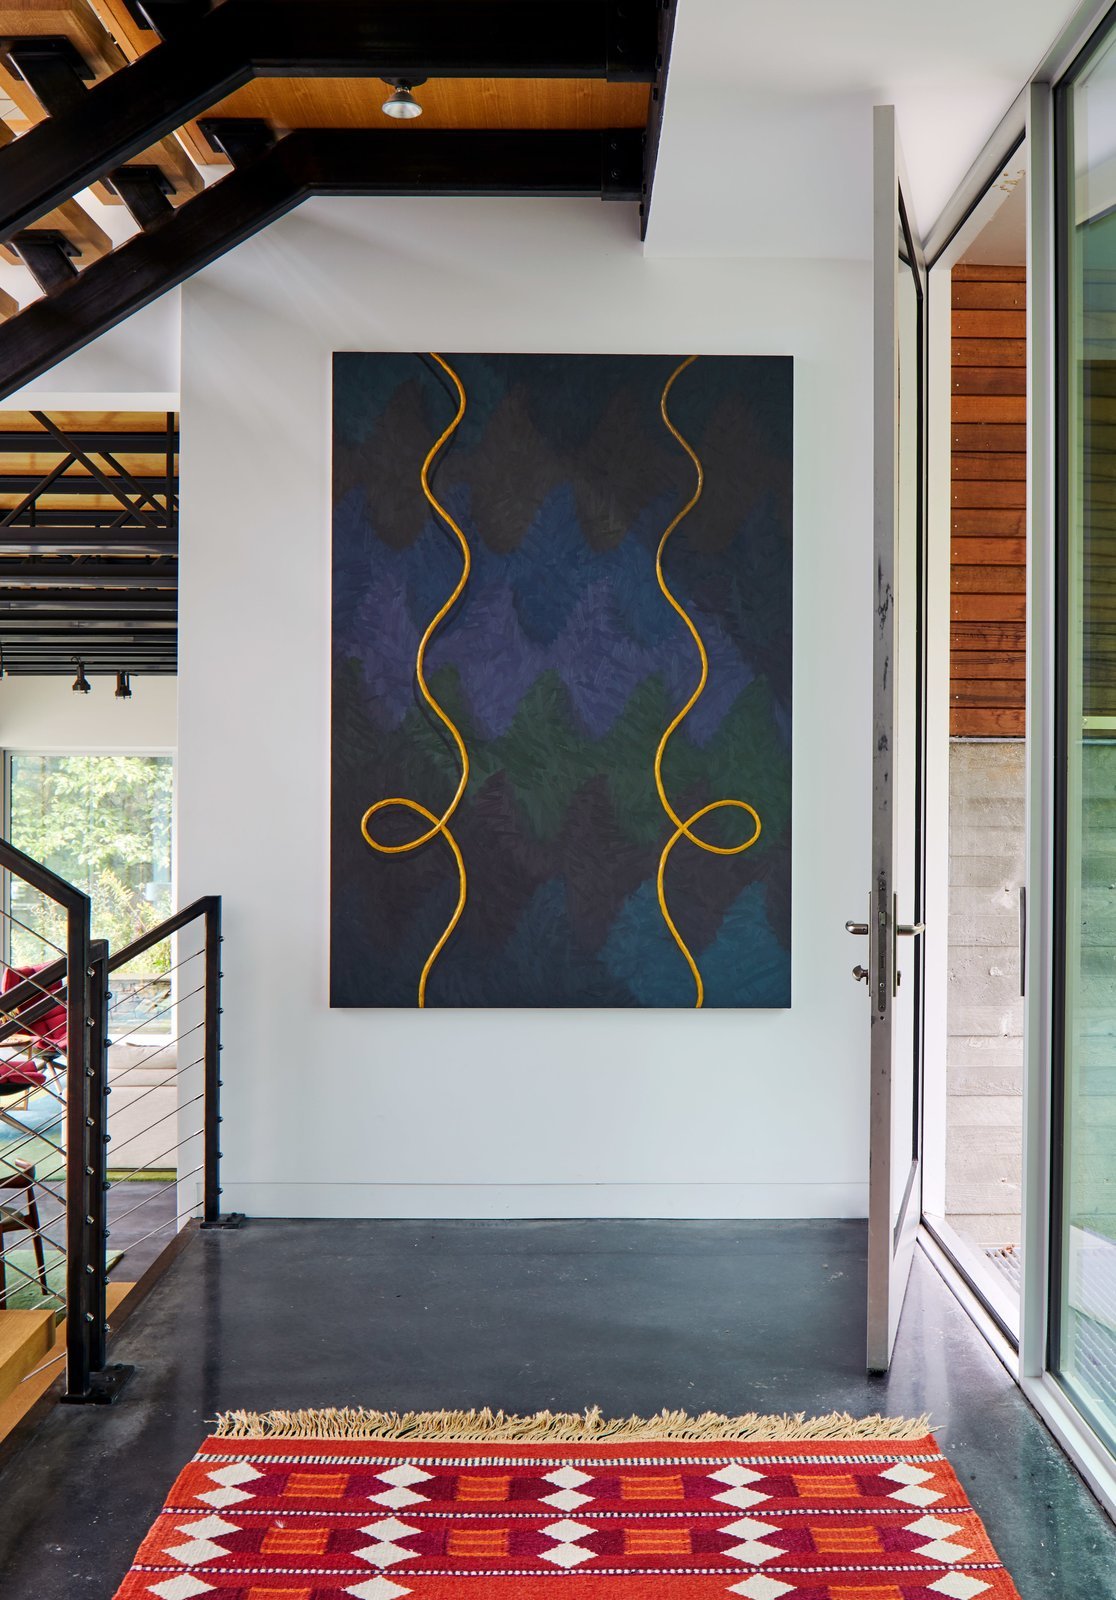   Alex Olson's Cast, which is oil and modeling clay on canvas, hangs above a vintage Swedish rug.  